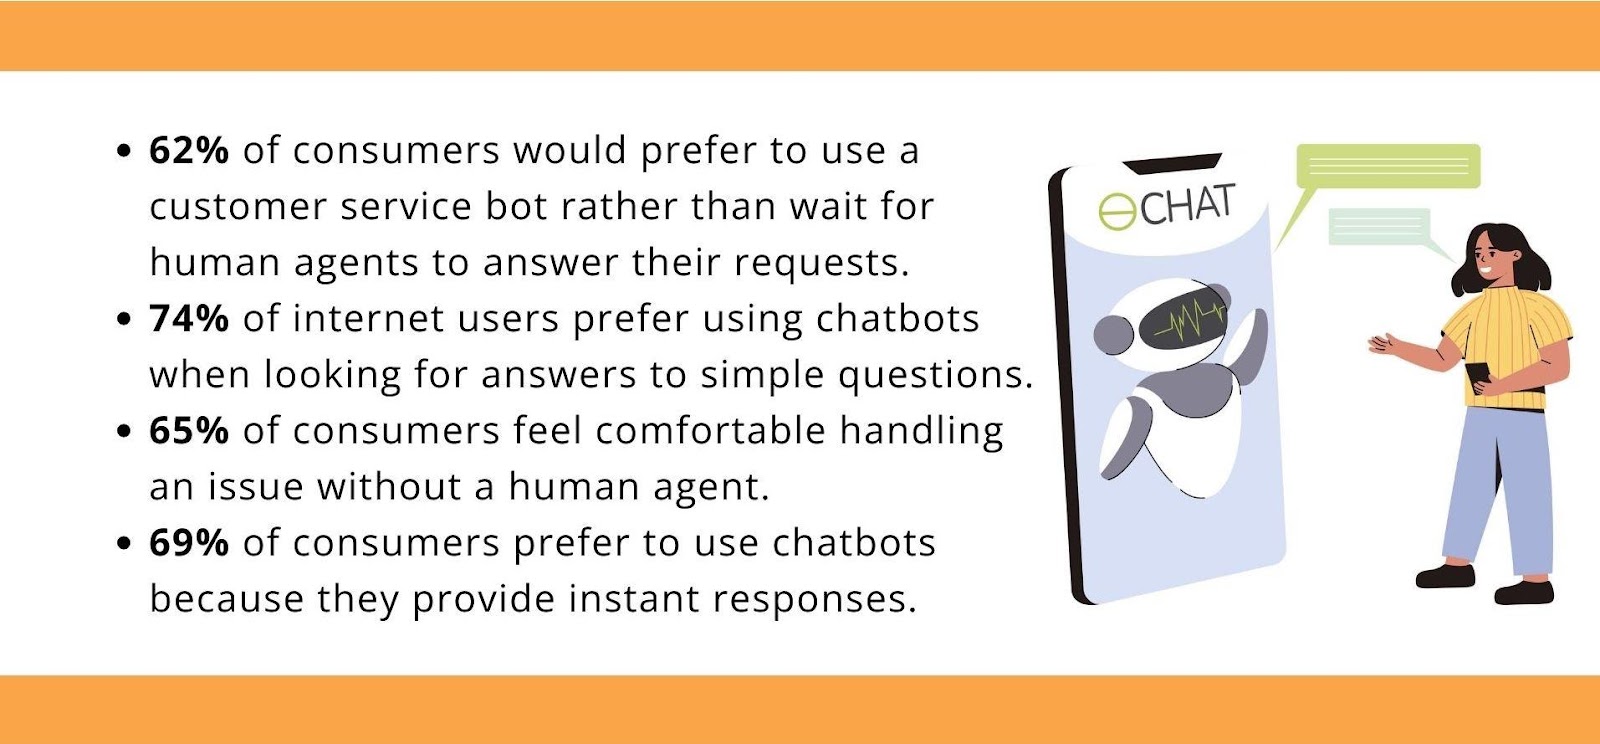 62% of consumers would prefer to use a customer service bot rather than wait for human agents to answer their requests. 74% of internet users prefer using chatbots when looking for answers to simple questions. 65% of consumers feel comfortable handling an issue without a human agent. 